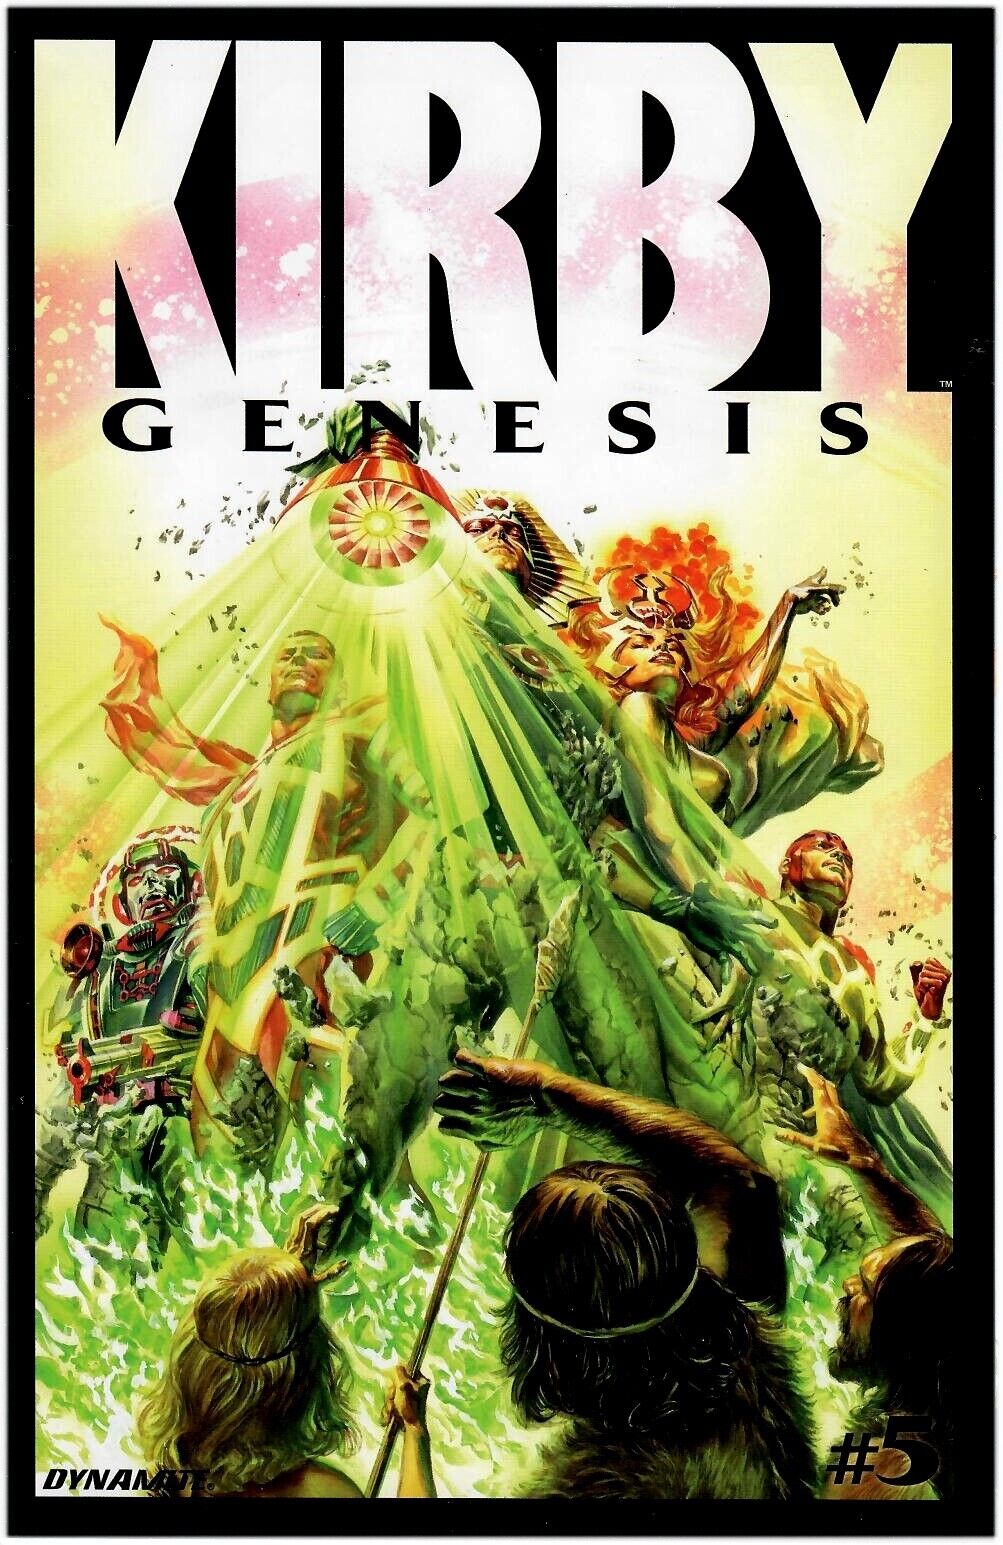 KIRBY GENESIS #5 (OF 9) ALEX ROSS COVER 2011 DYNAMITE ENTERTAINMENT COMIC BOOK 1